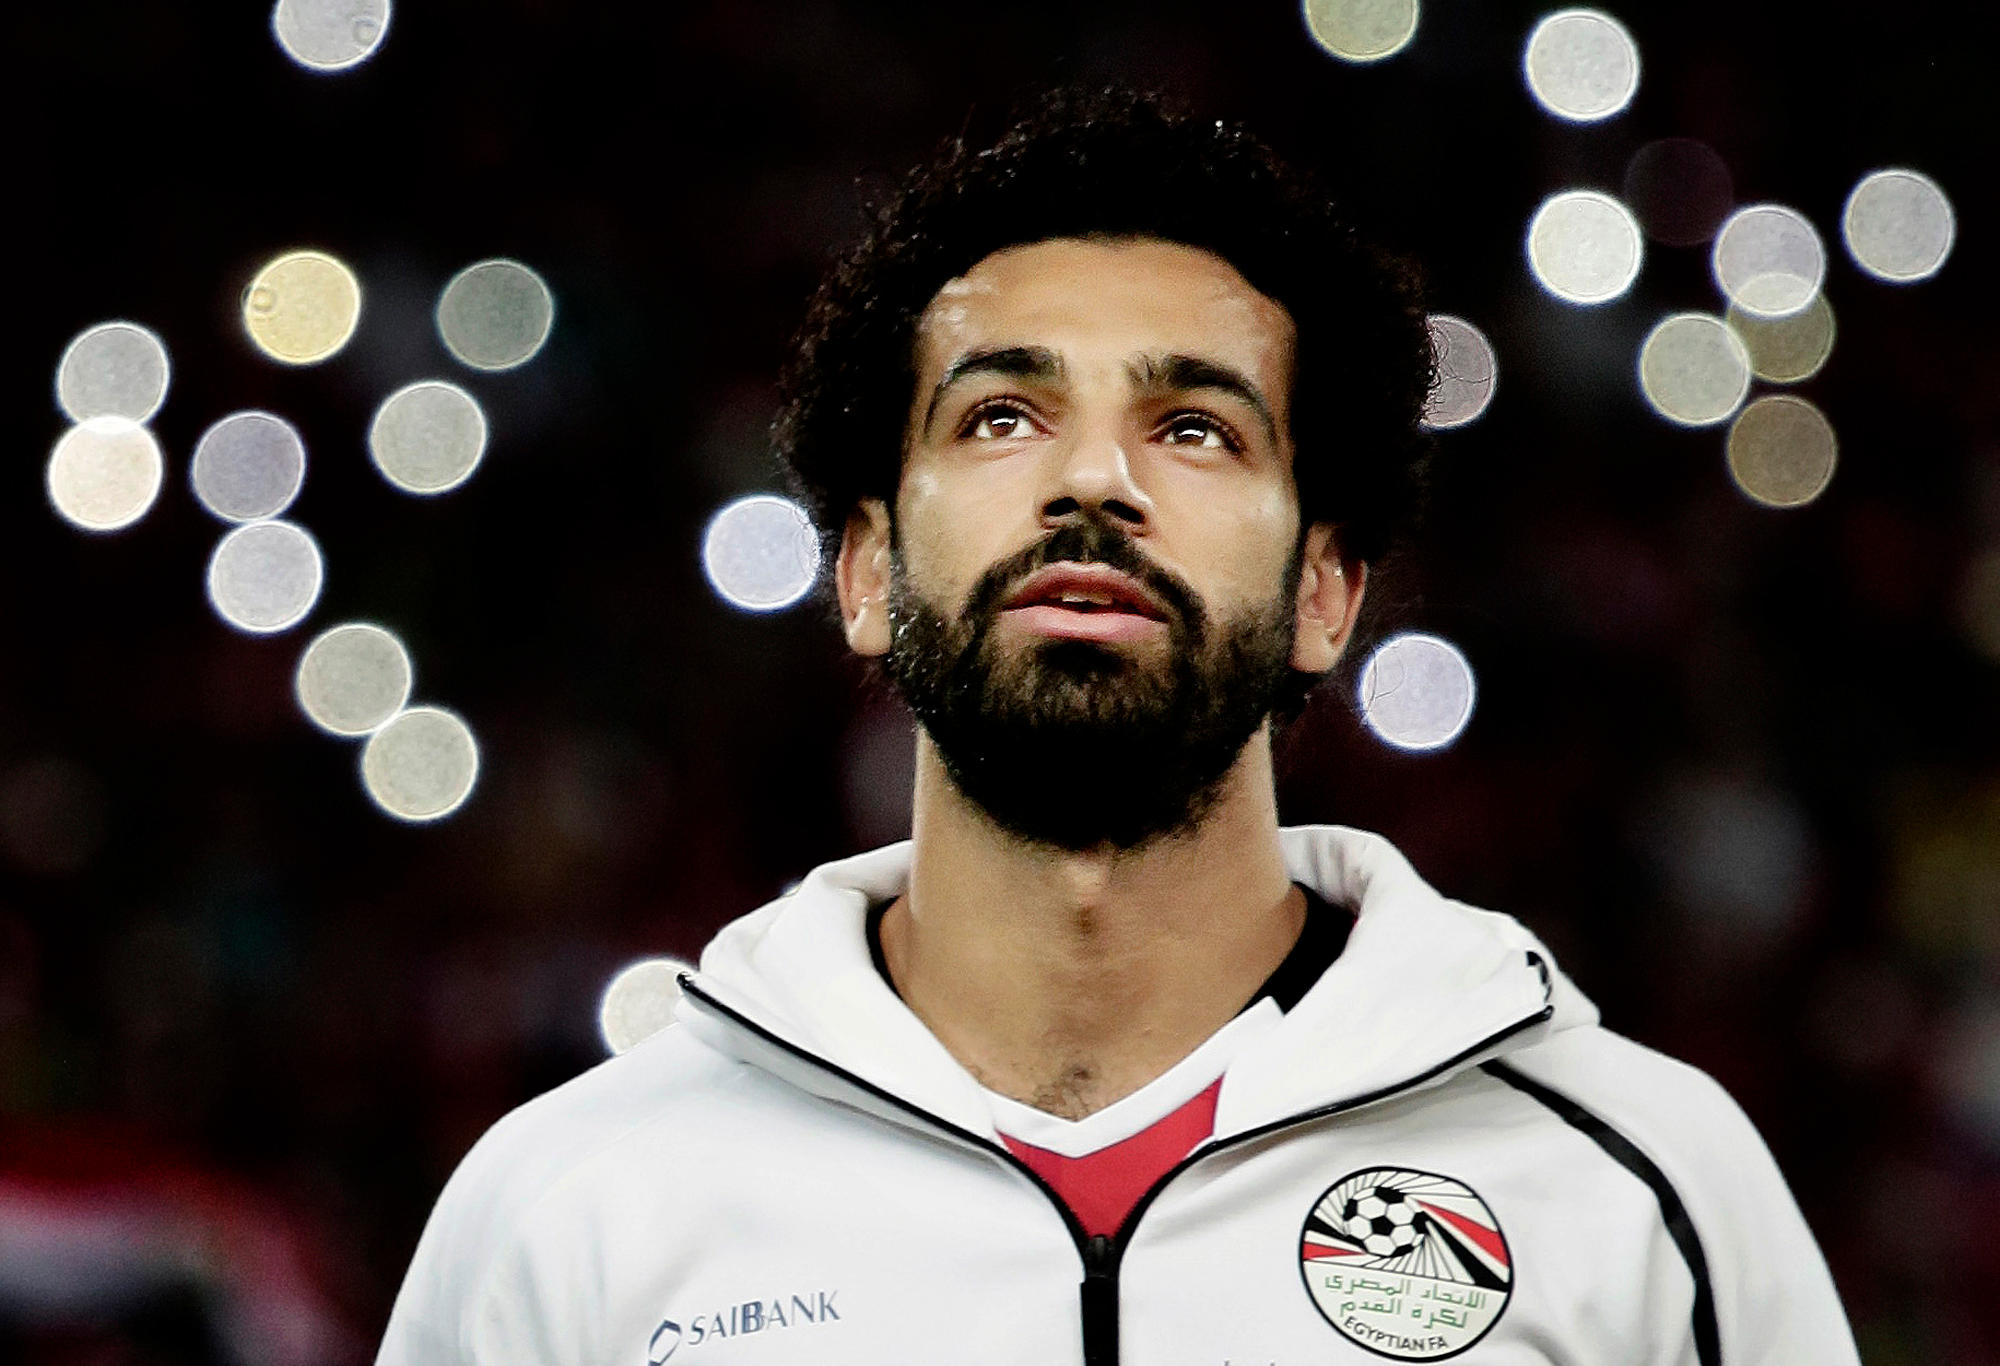 FILE - In this Oct. 8, 2017 file photo, Egypt's Mohamed Salah sings the national anthem before the 2018 World Cup group E qualifying soccer match between Egypt and Congo at the Borg El Arab Stadium in Alexandria. Egypt’s first World Cup warmup will be against Portugal, a match that could have two of the most prolific scorers in soccer going up against each other. The Egyptians, who will play at the World Cup for the first time in 28 years, will be led by Salah.